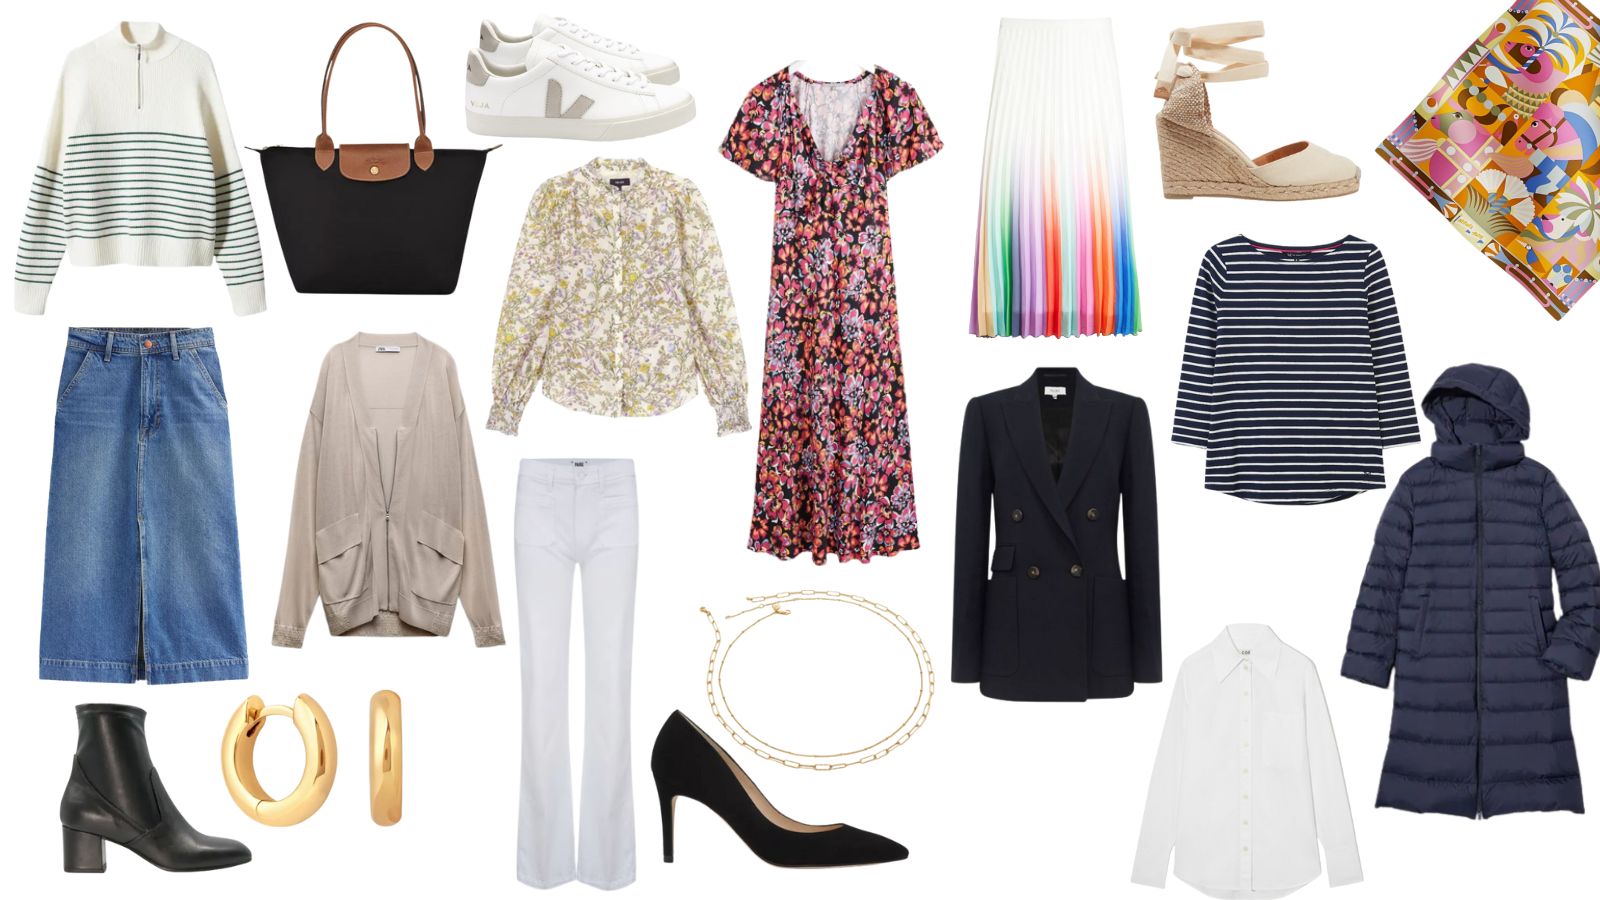 How to build a capsule wardrobe for women over 60